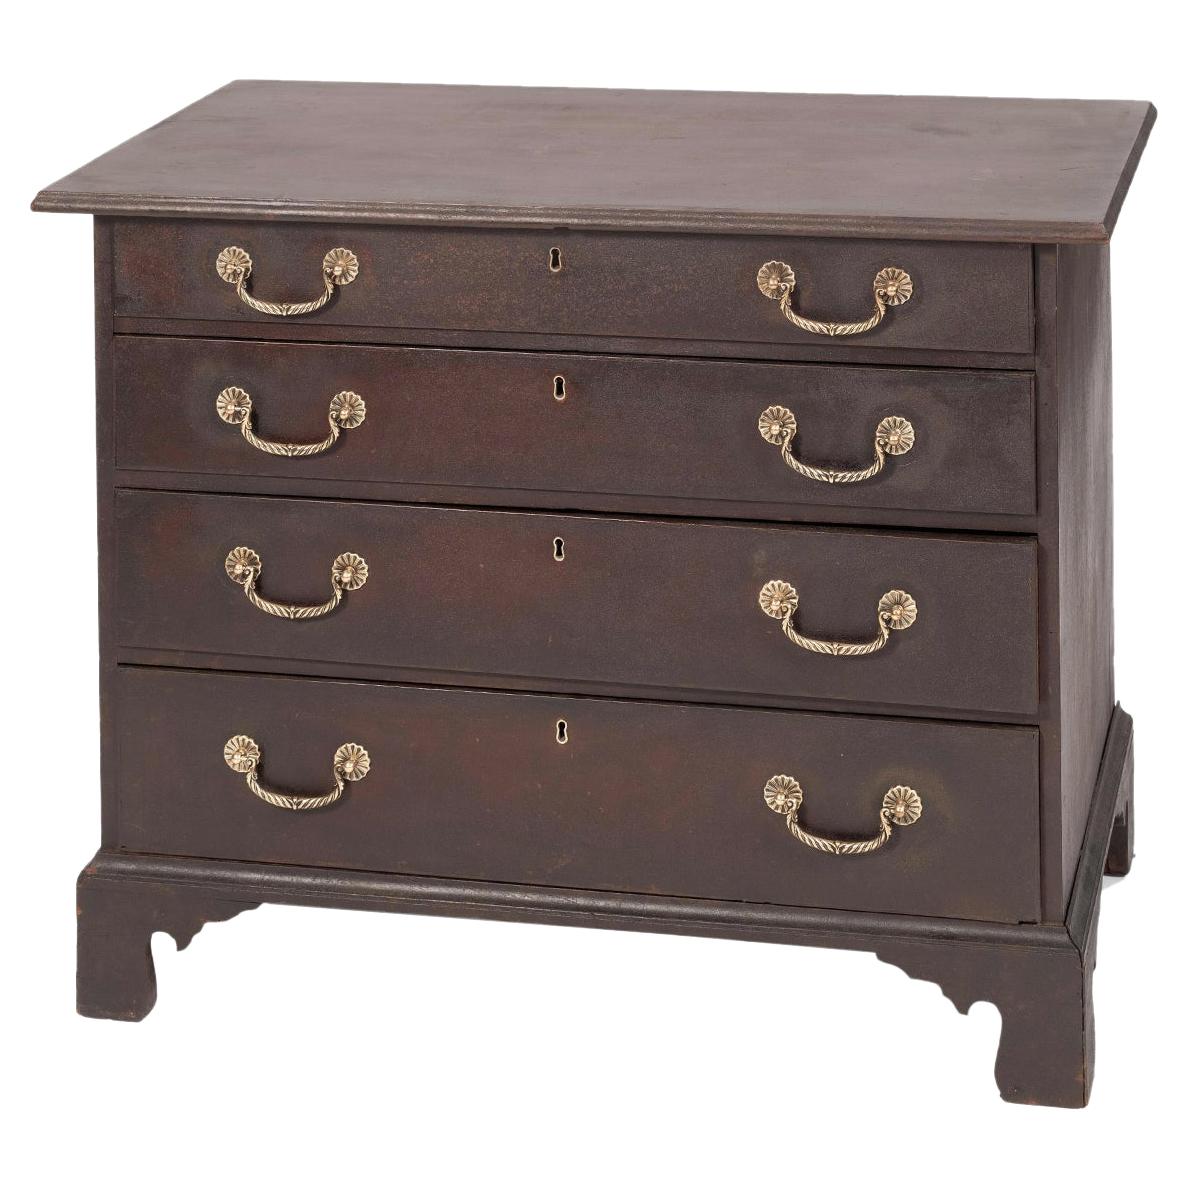 Late 18th Century Chippendale Chest of Drawers